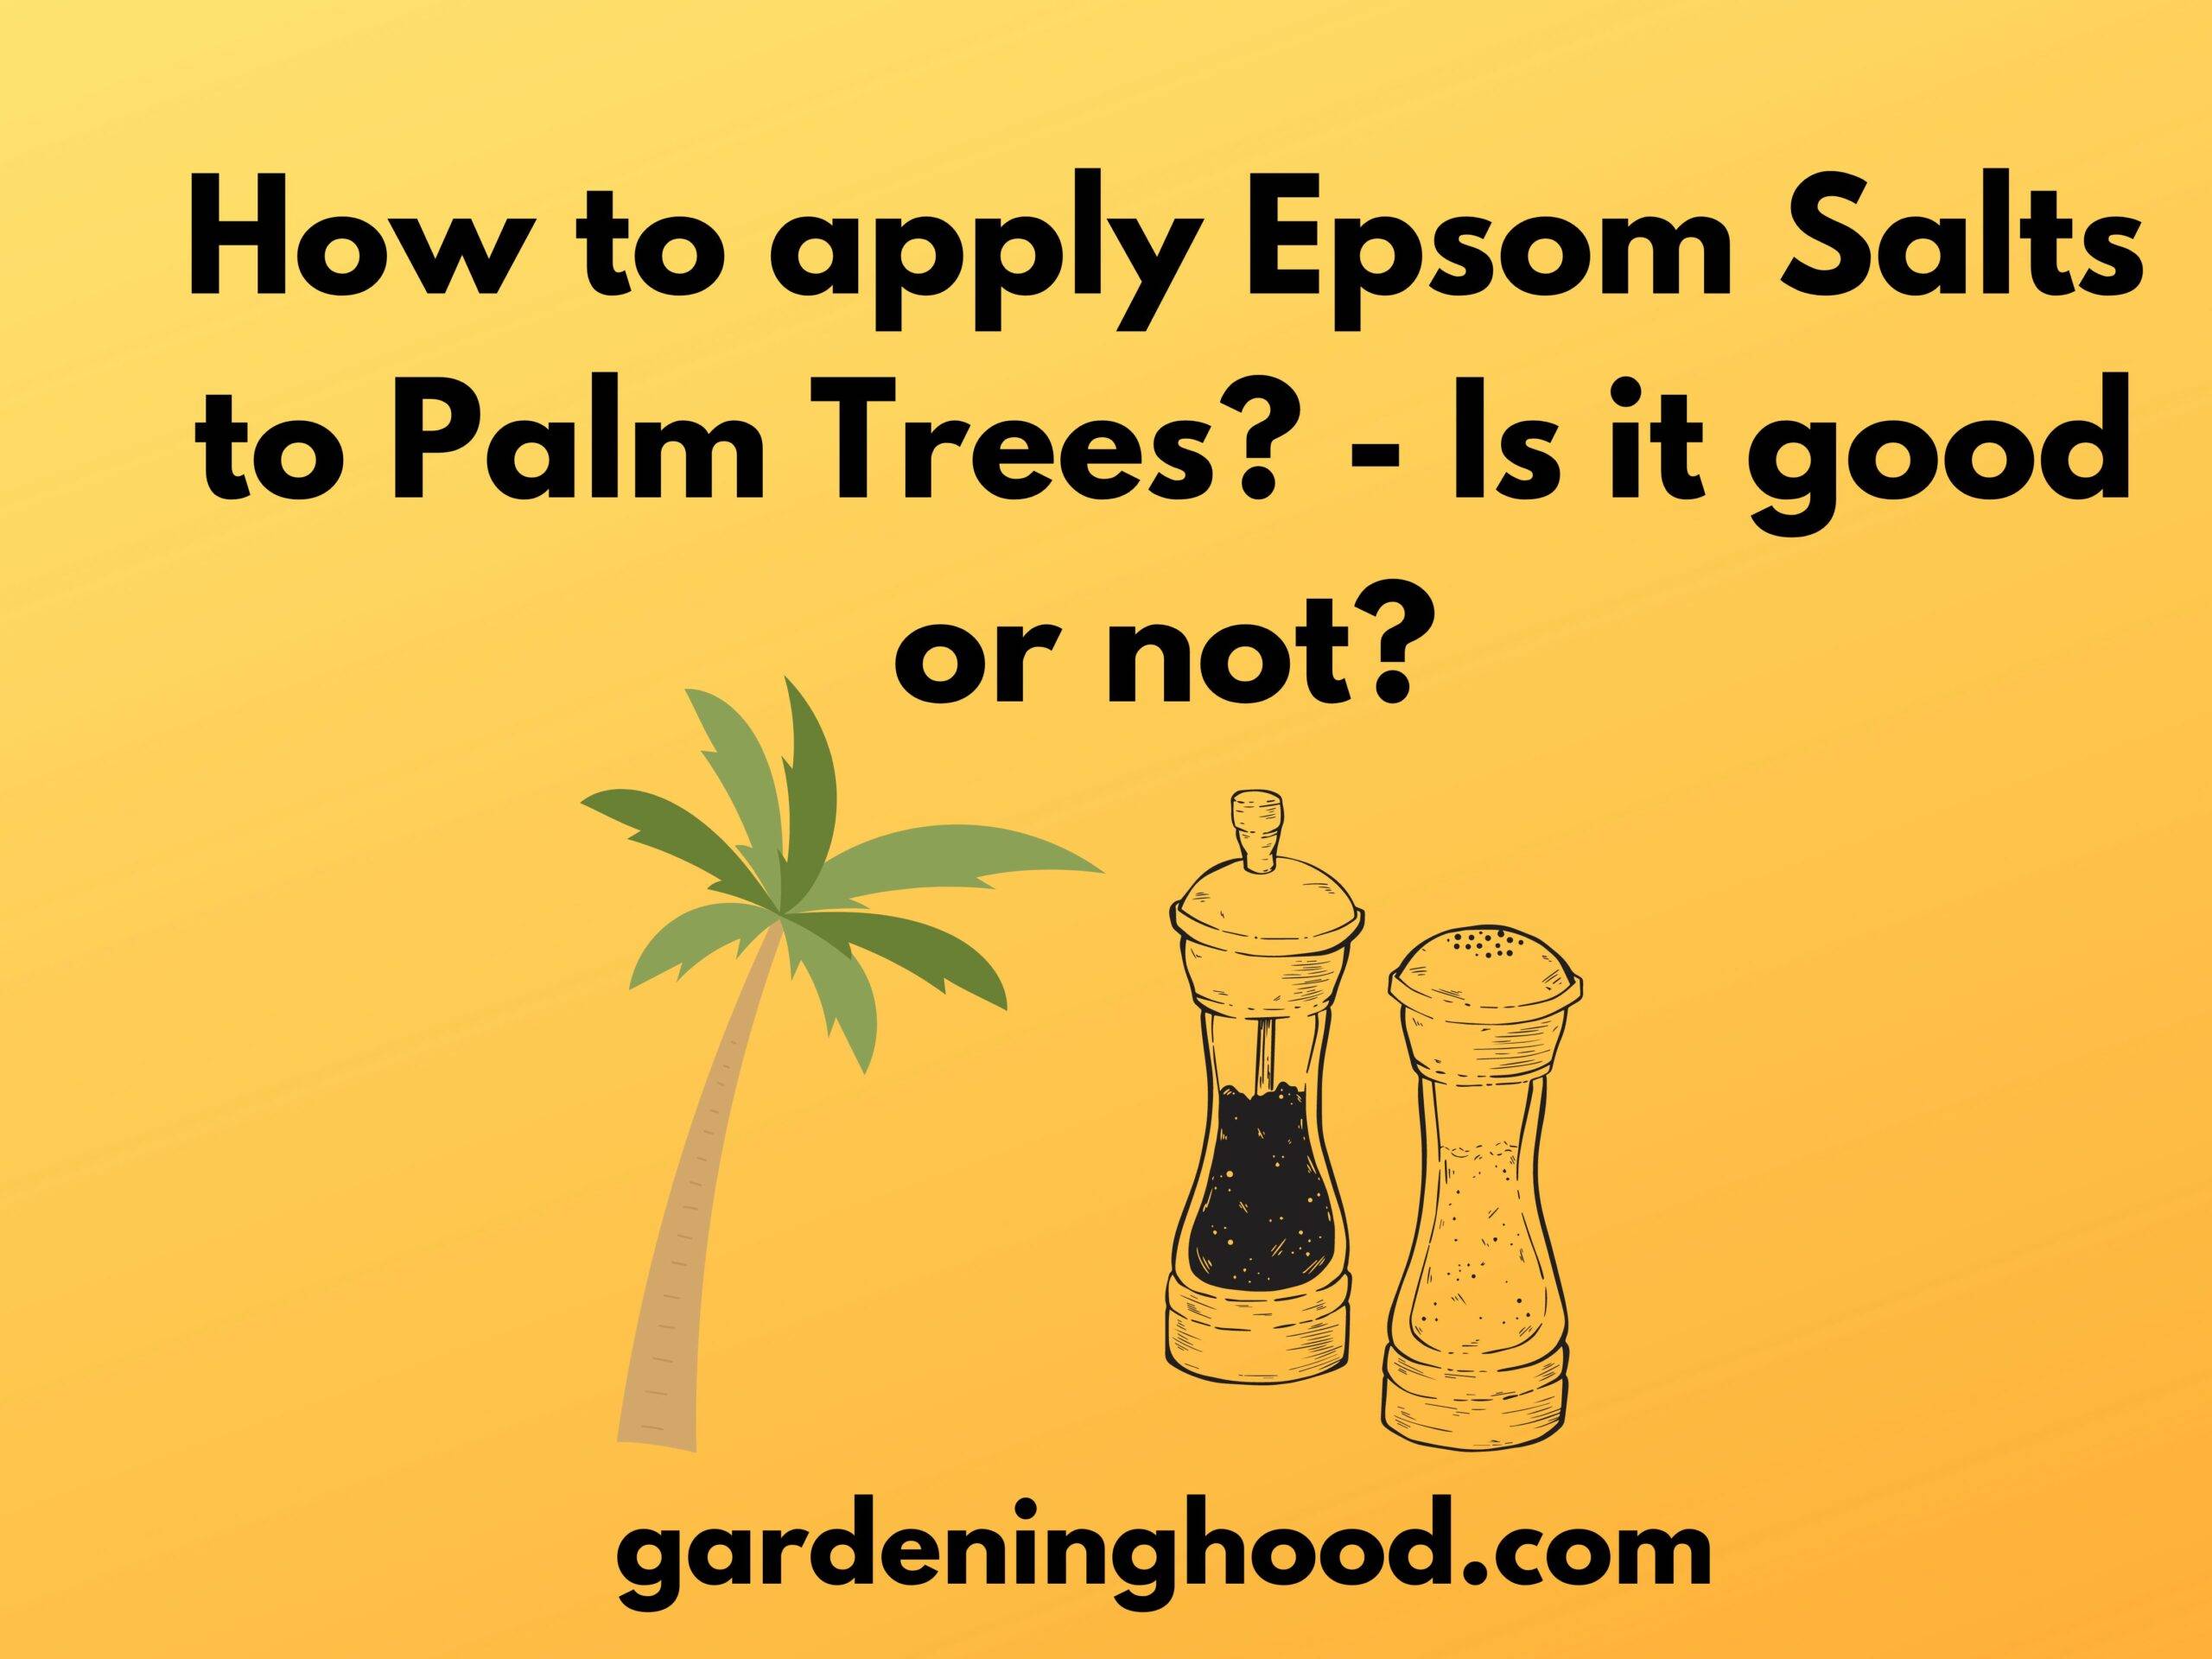 How to apply Epsom Salts to Palm Trees? - Is it good or not?